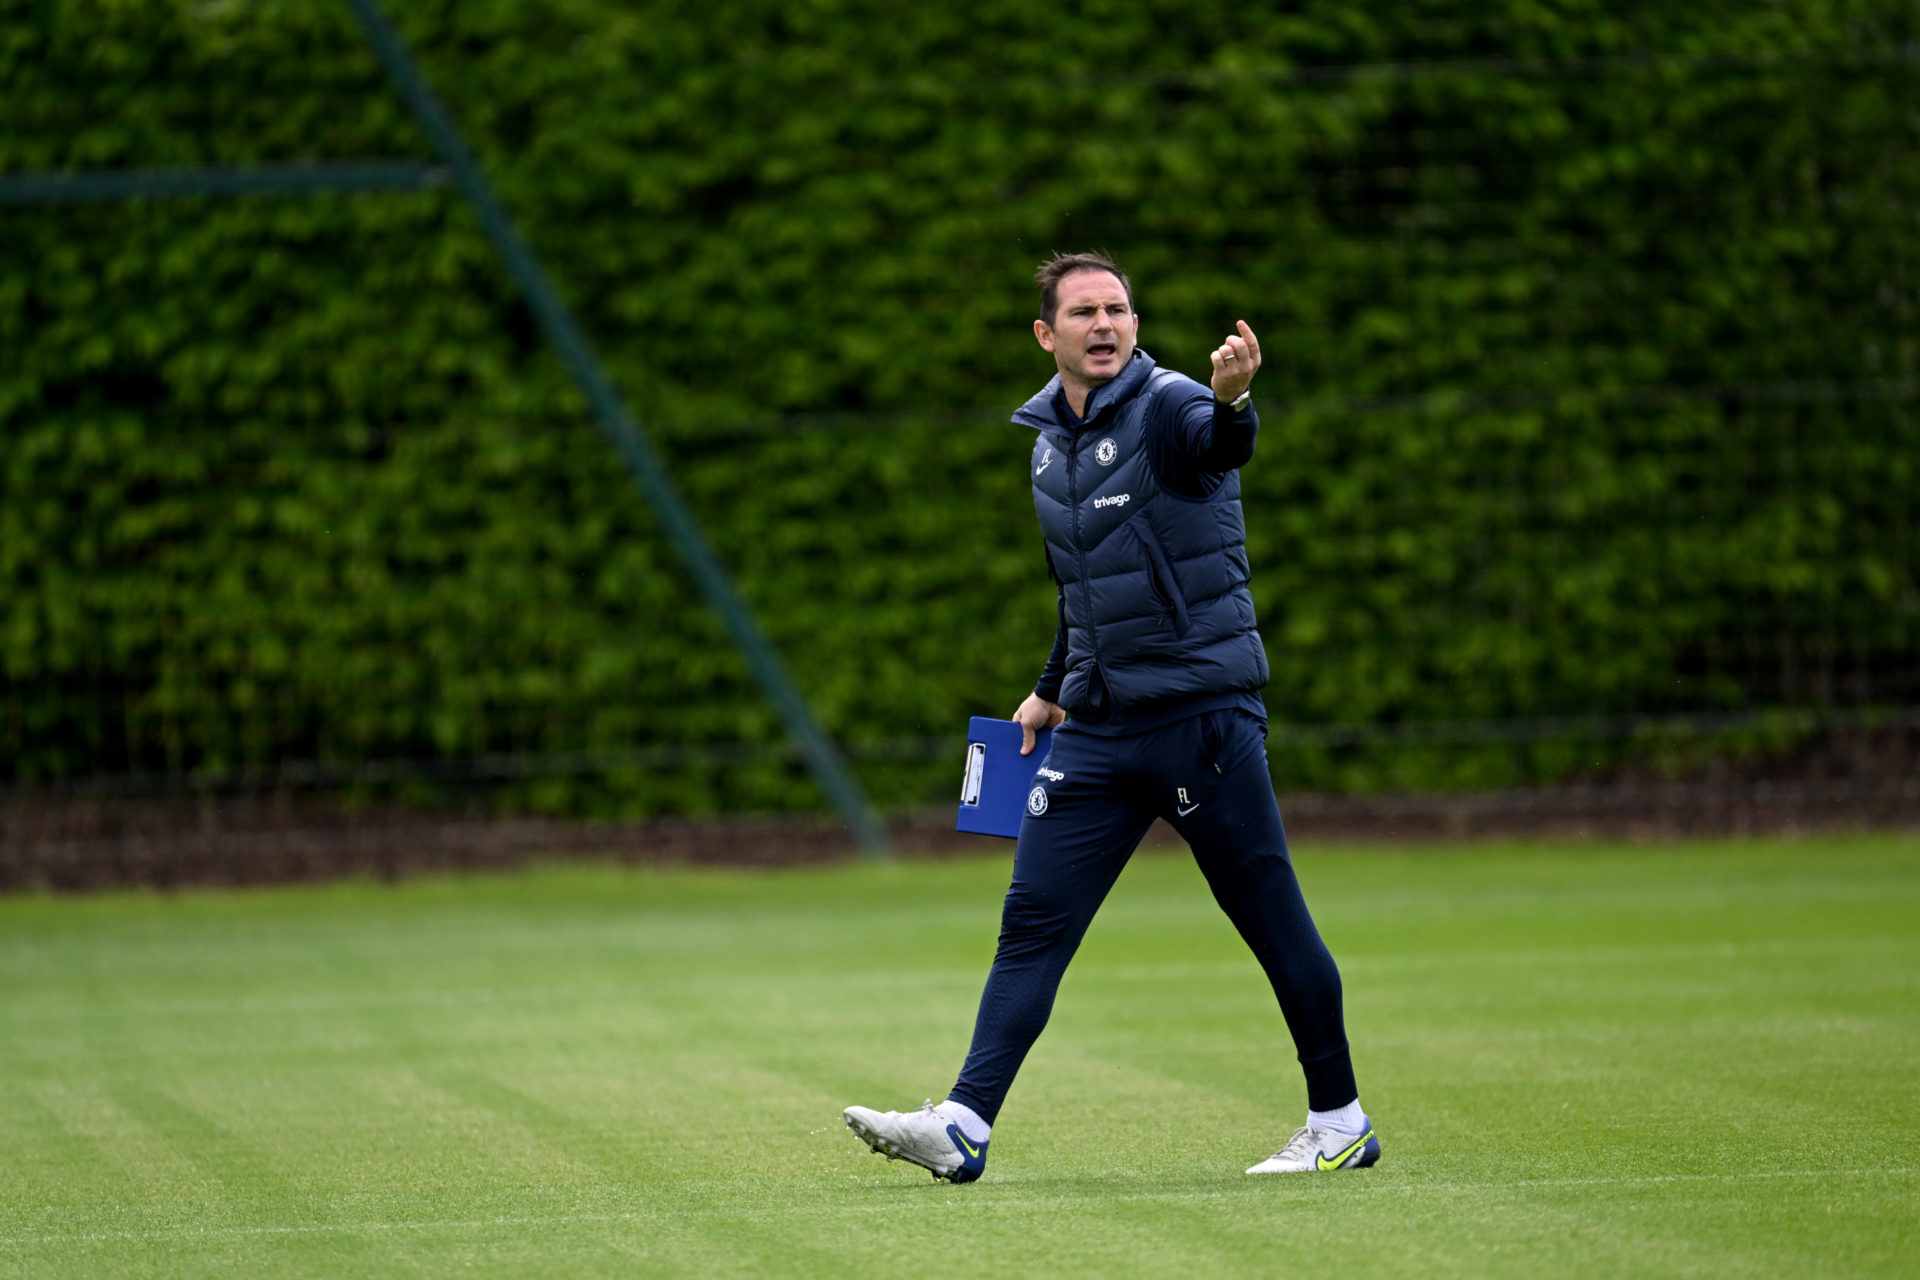 Chelsea player received a telling off from Lampard for what he did in training